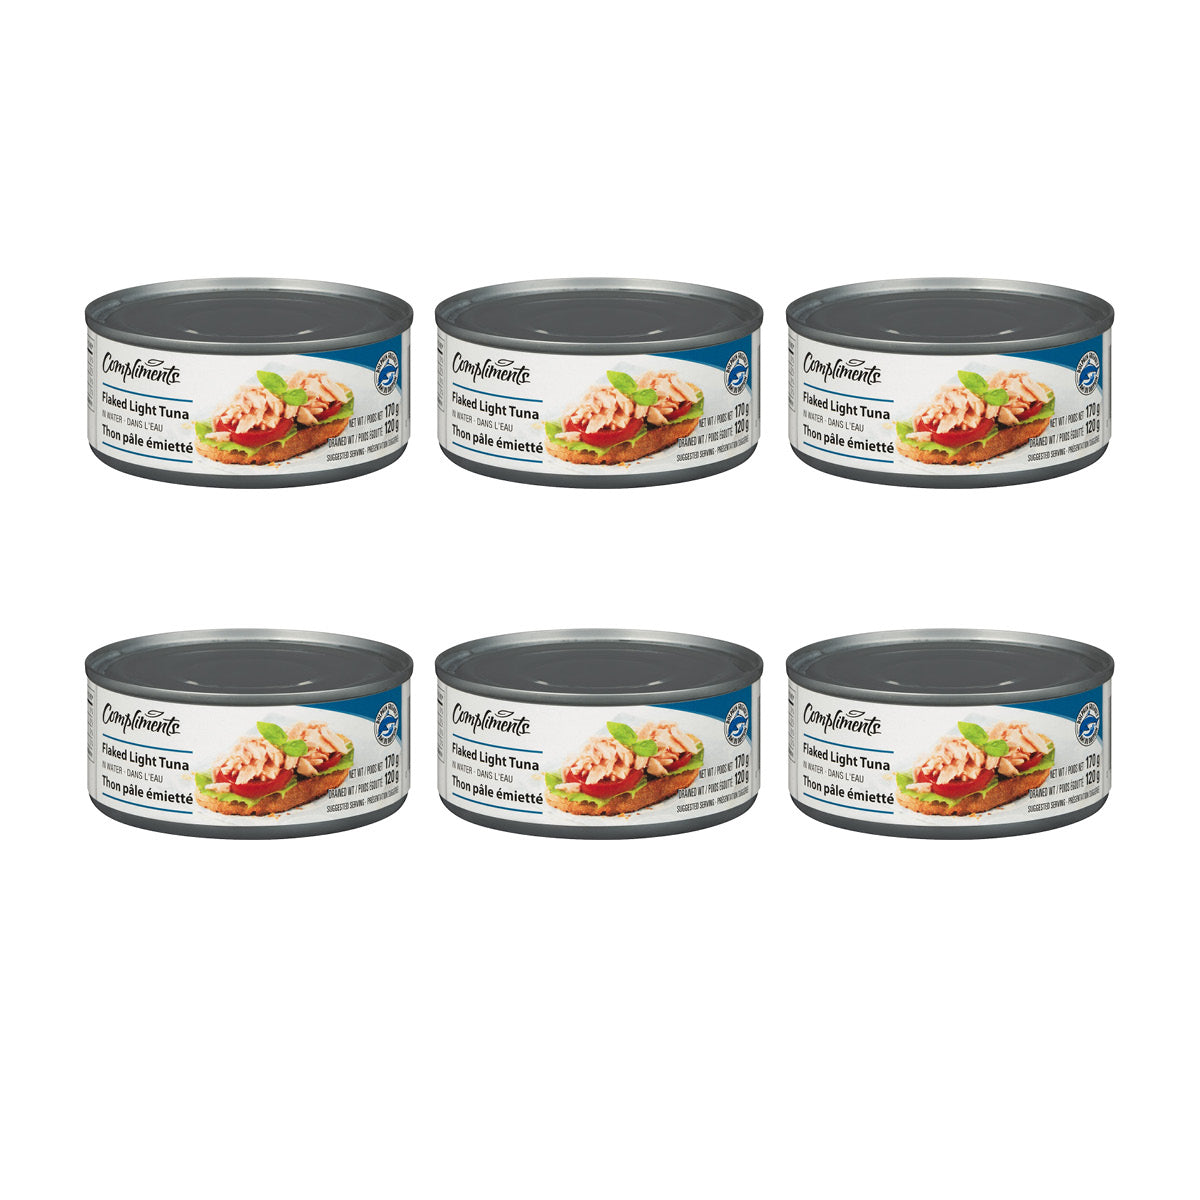 Compliments Tuna, Light Flaked in Water, 6pk